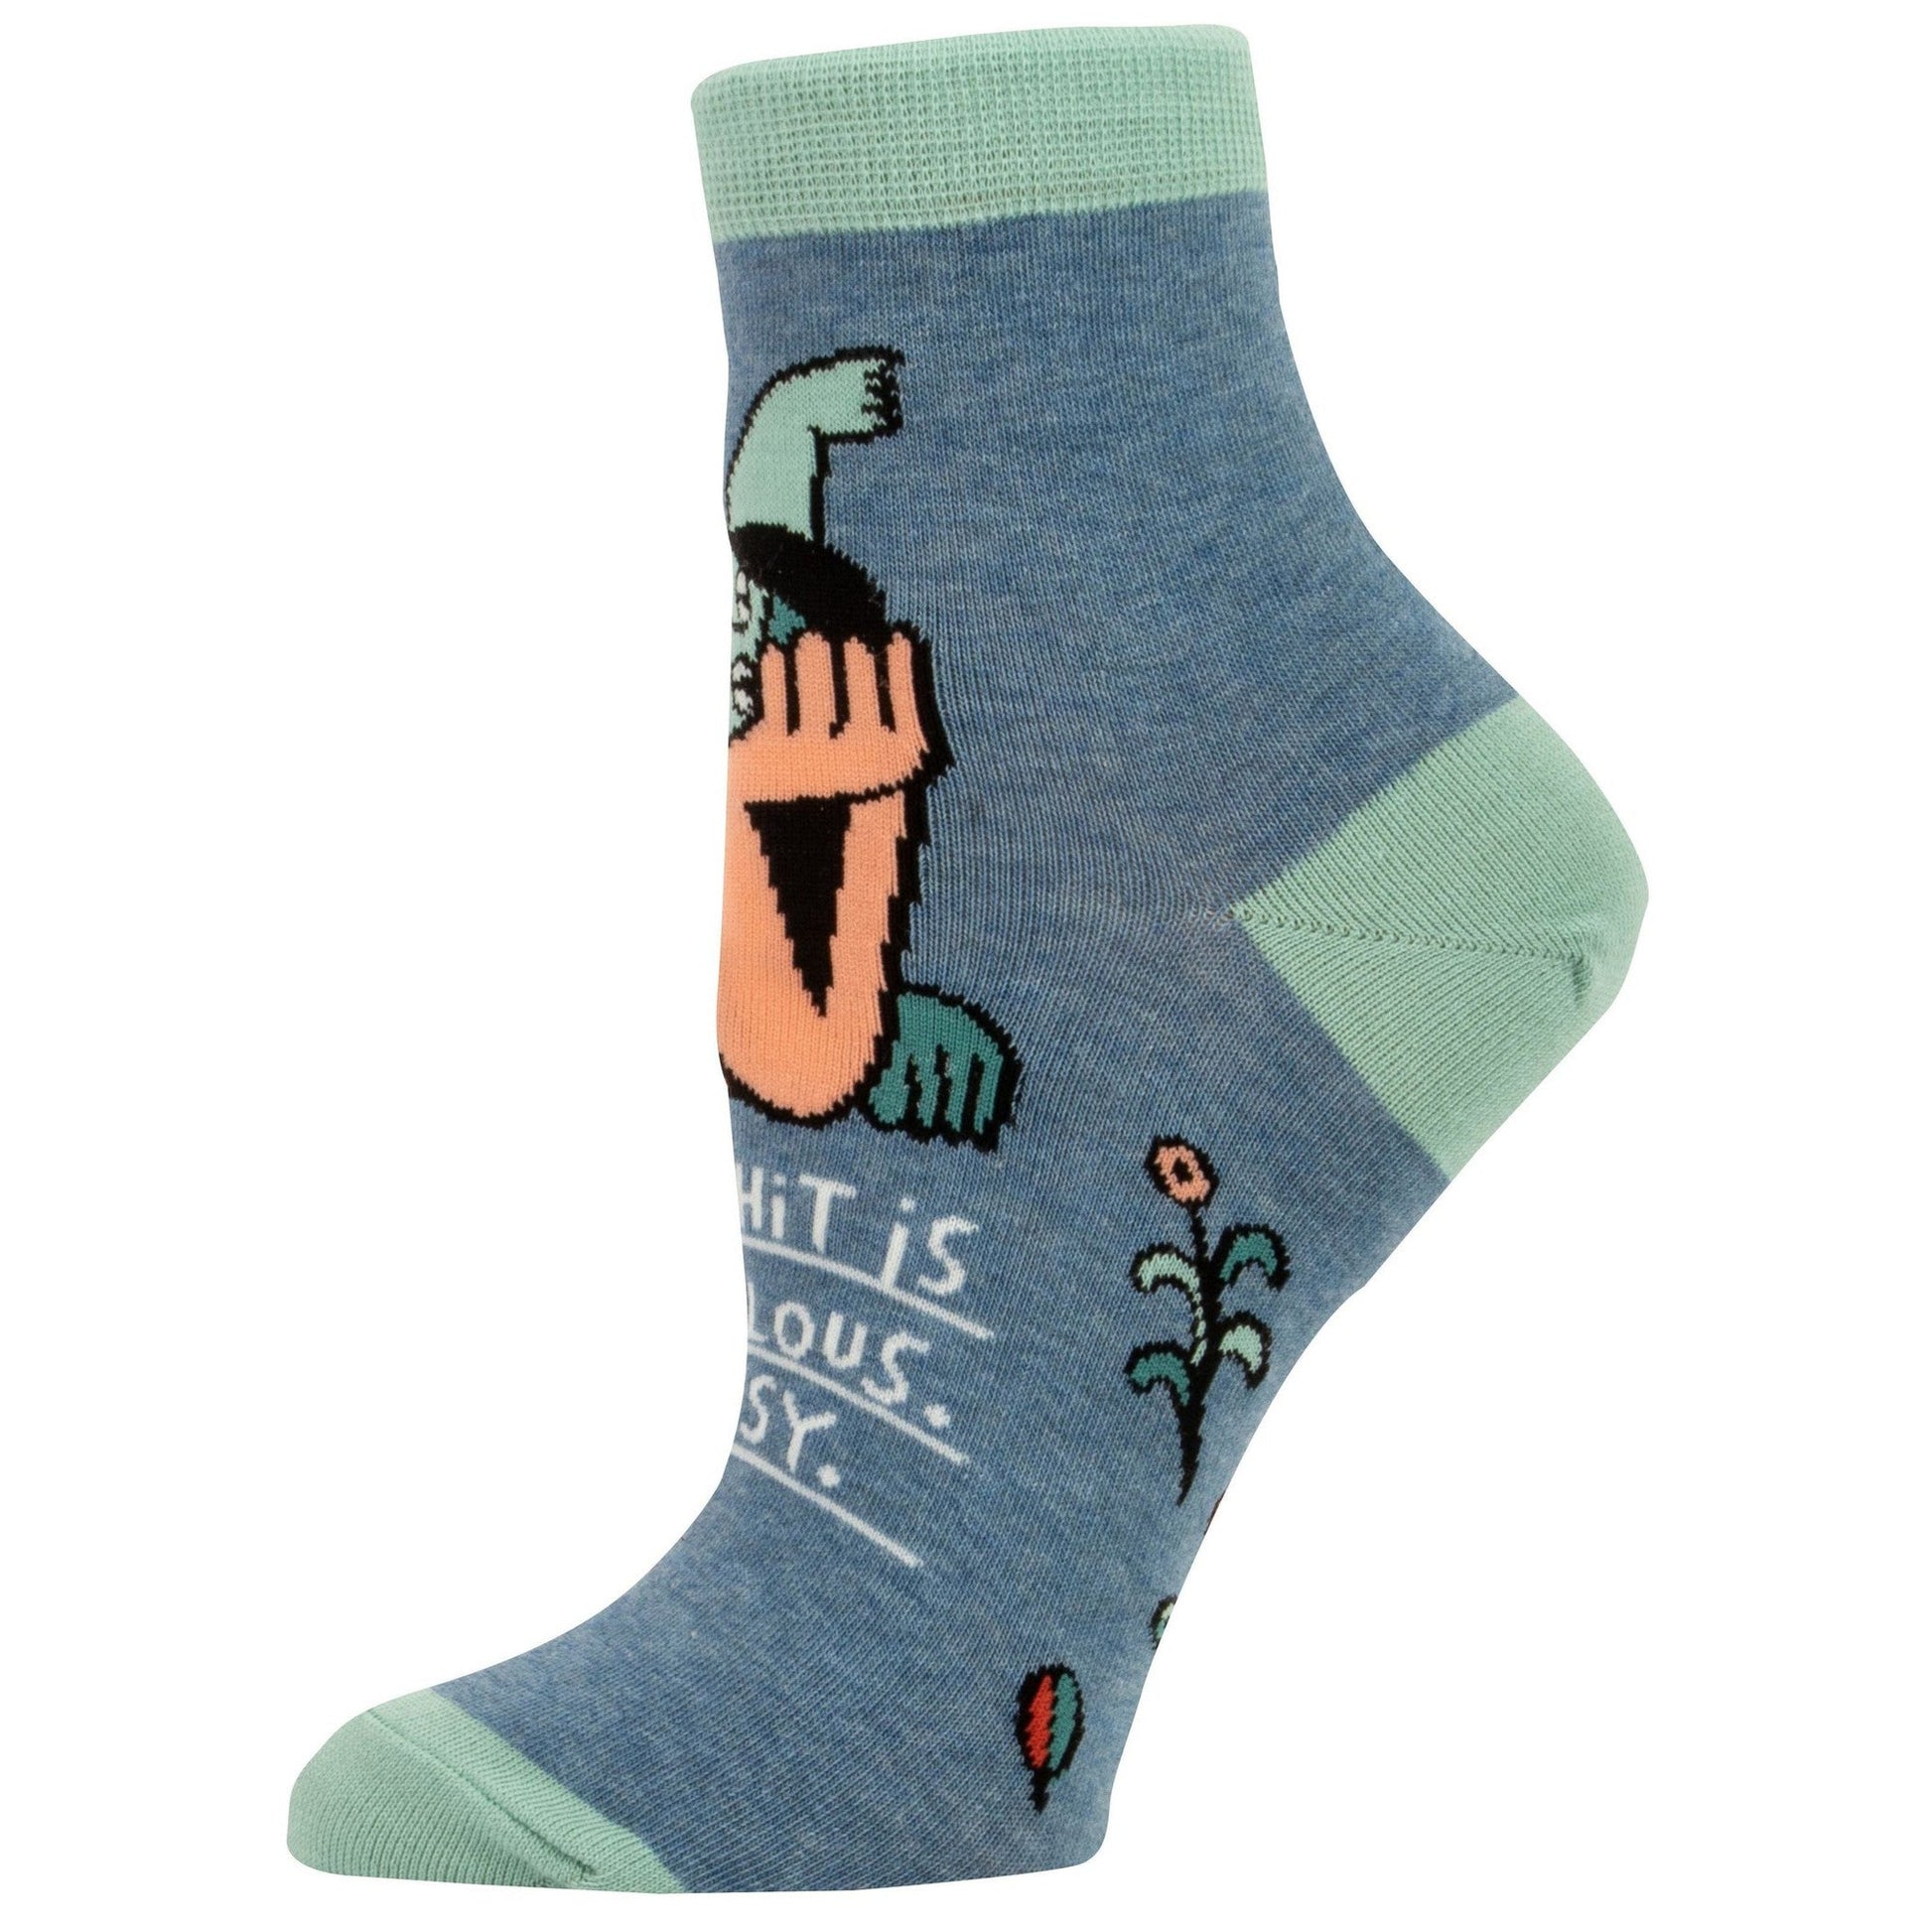 Last Call! This Shit Is Ridiculous - I'm Busy Women's Ankle Socks